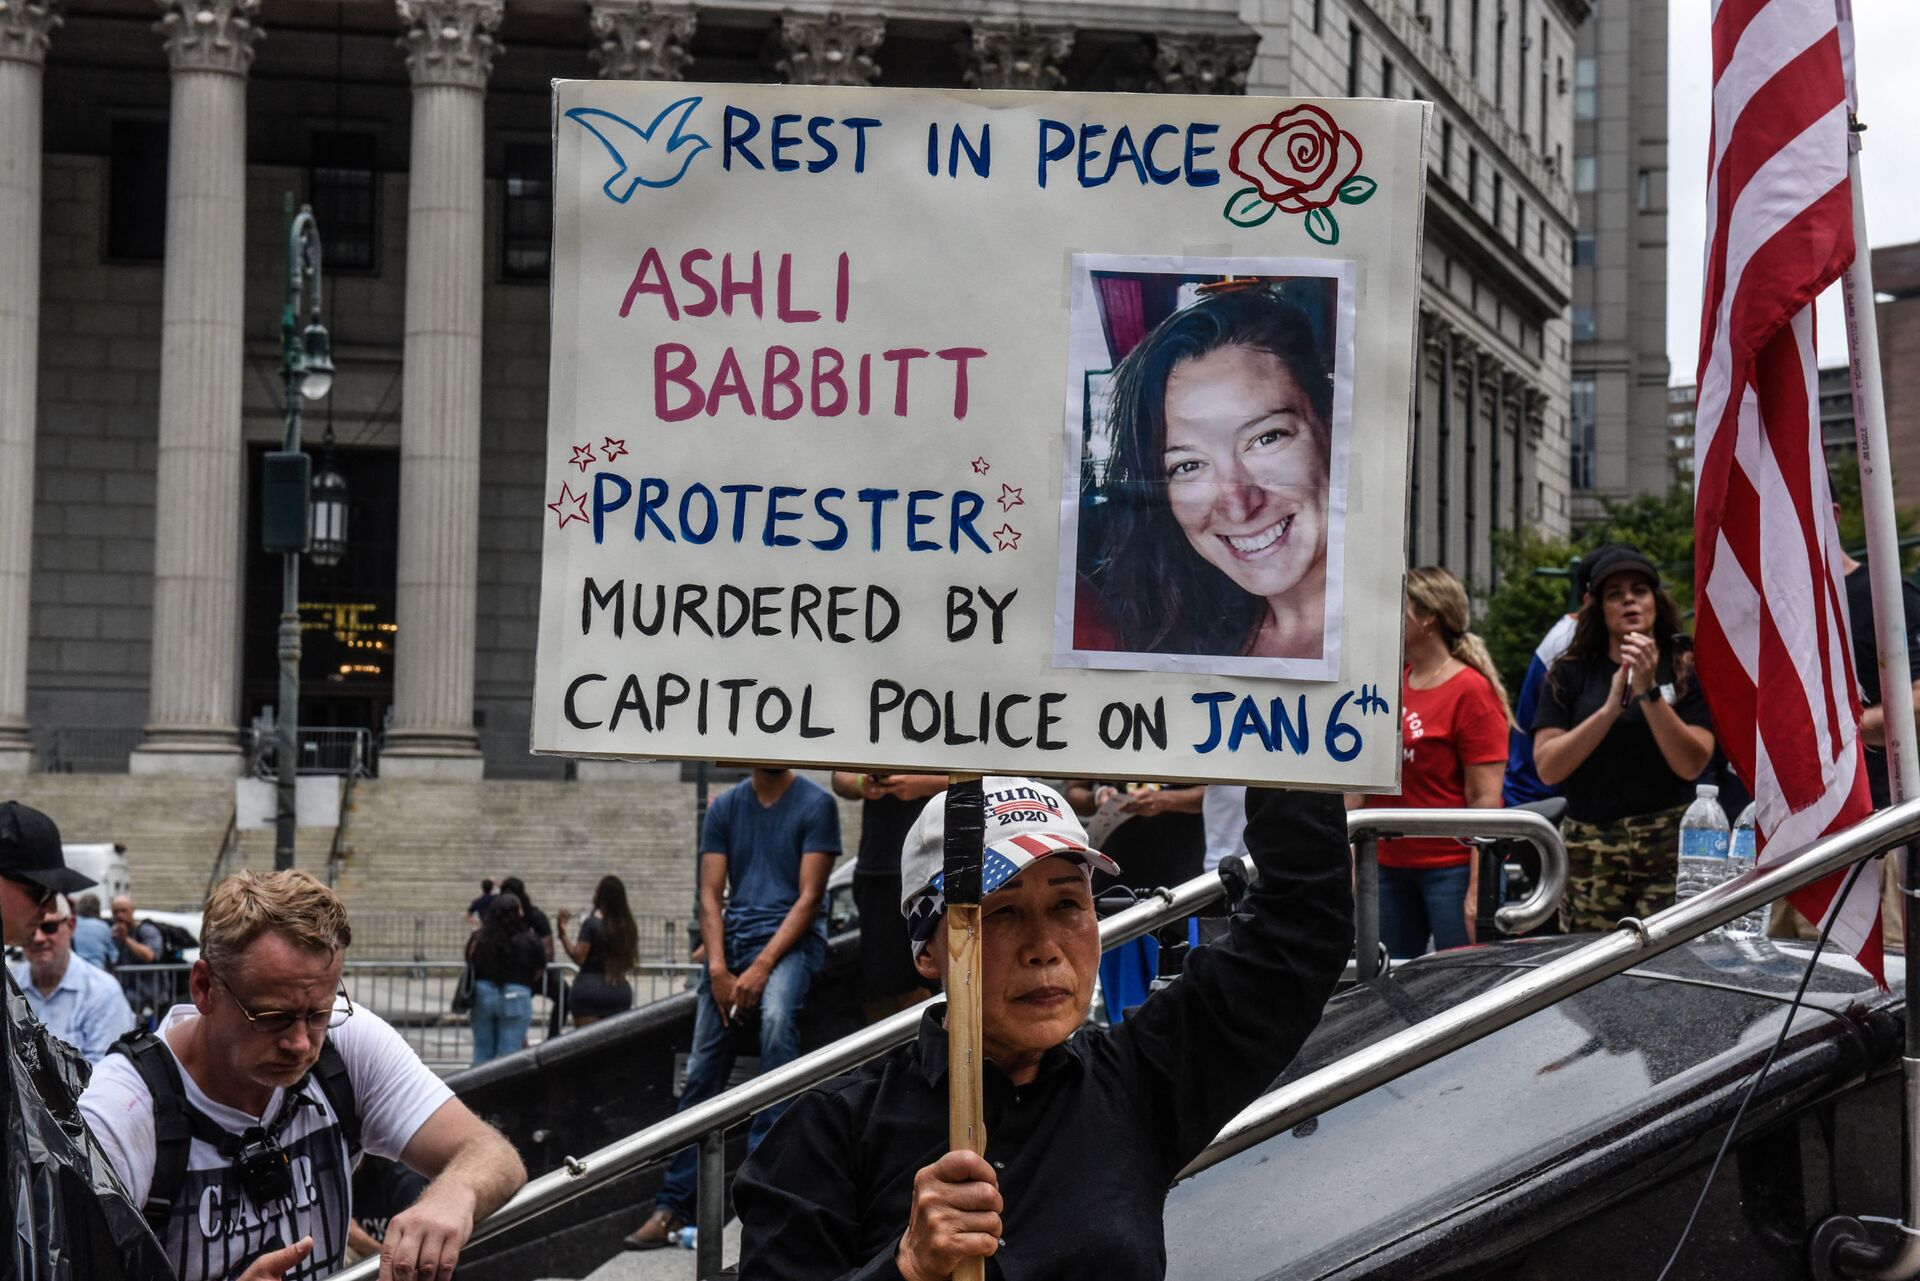 A right wing protester holds a sign about Ashli Babbitt while participating in a political rally on July 25, 2021 in New York City. - Sputnik International, 1920, 07.09.2021